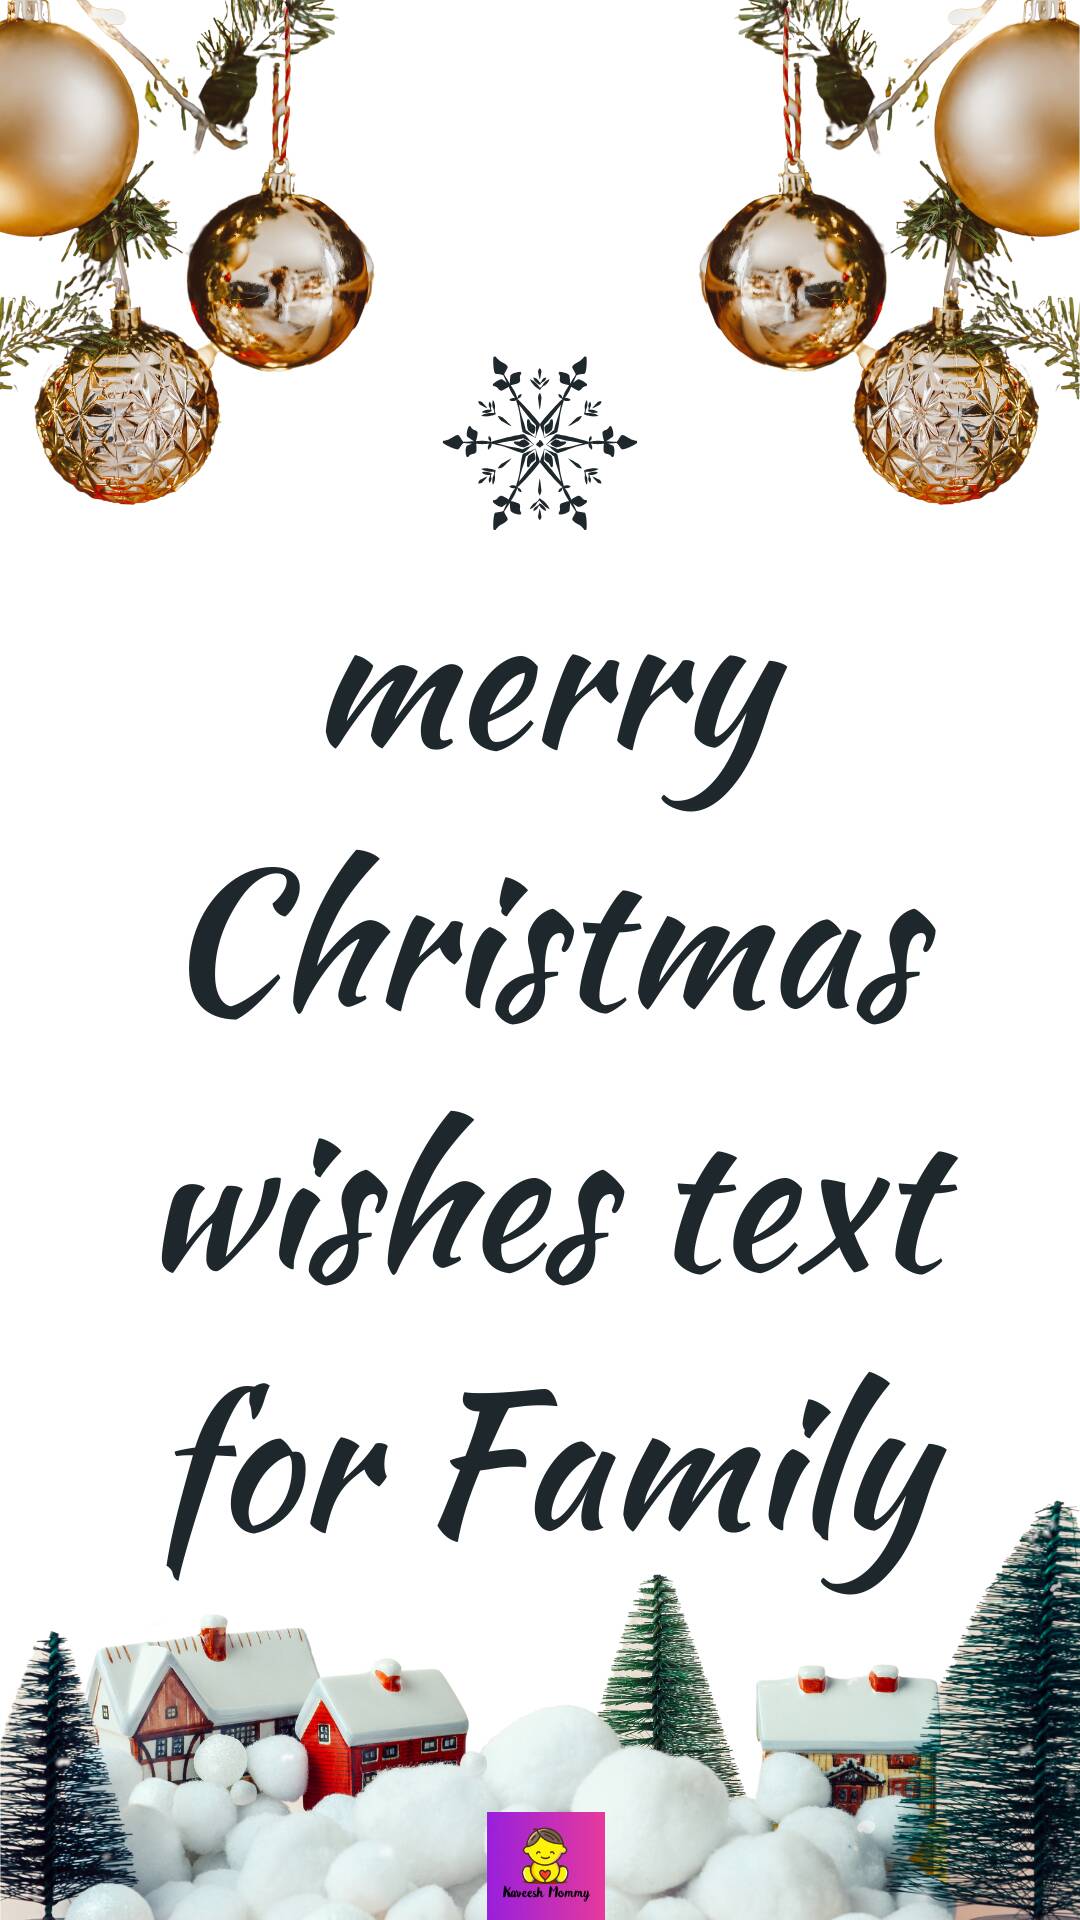 List of merry Christmas wishes text for Family